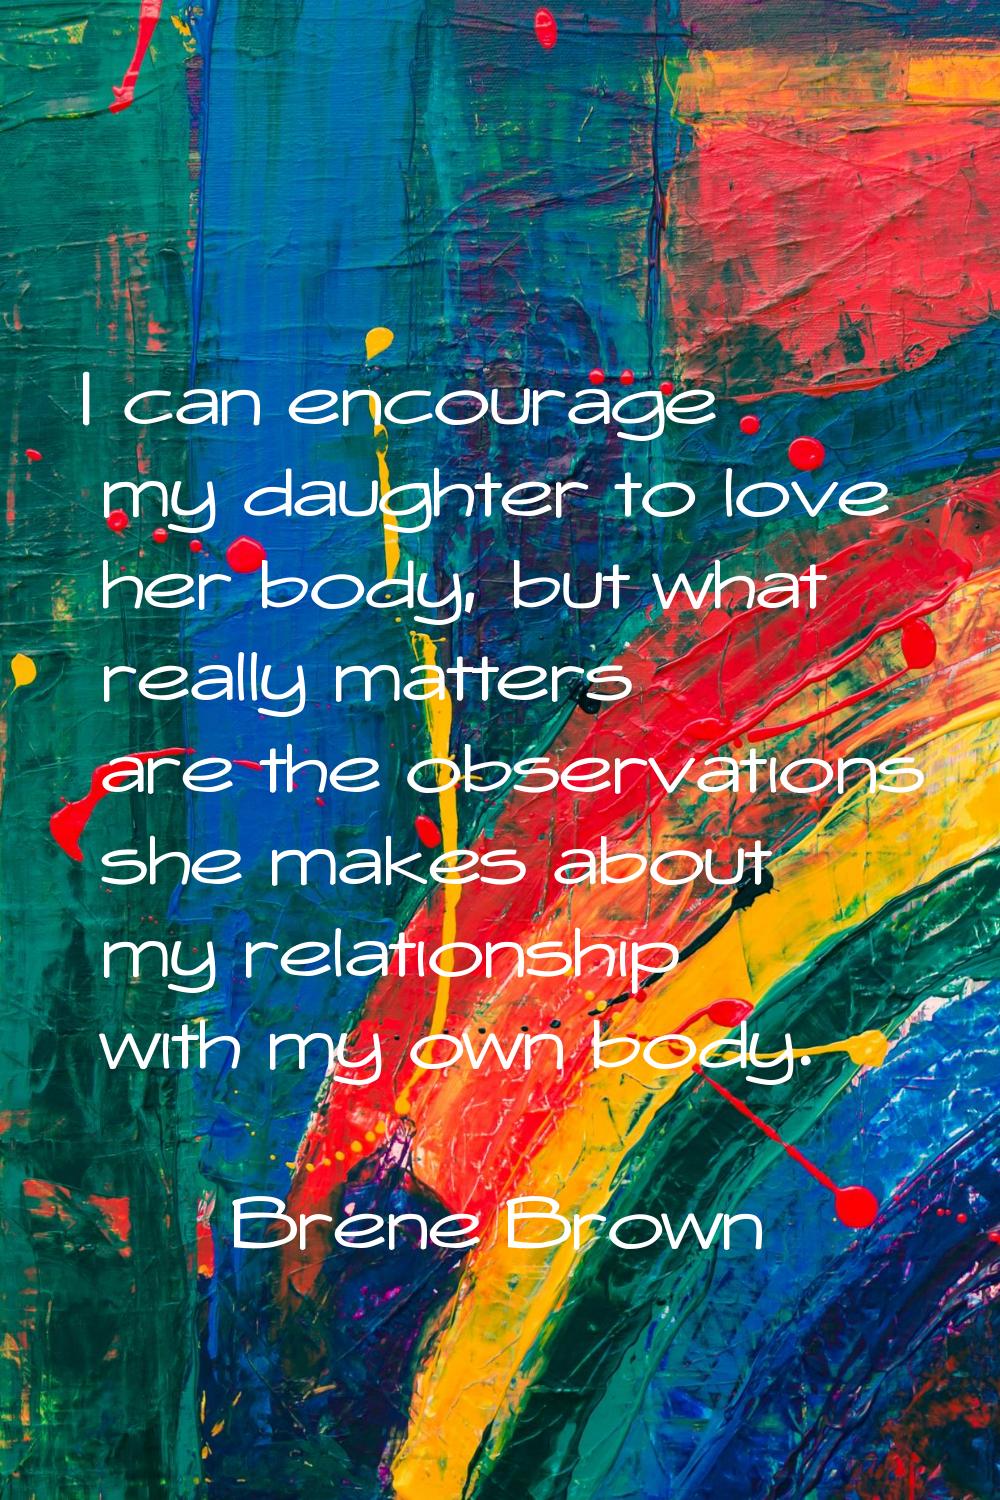 I can encourage my daughter to love her body, but what really matters are the observations she make